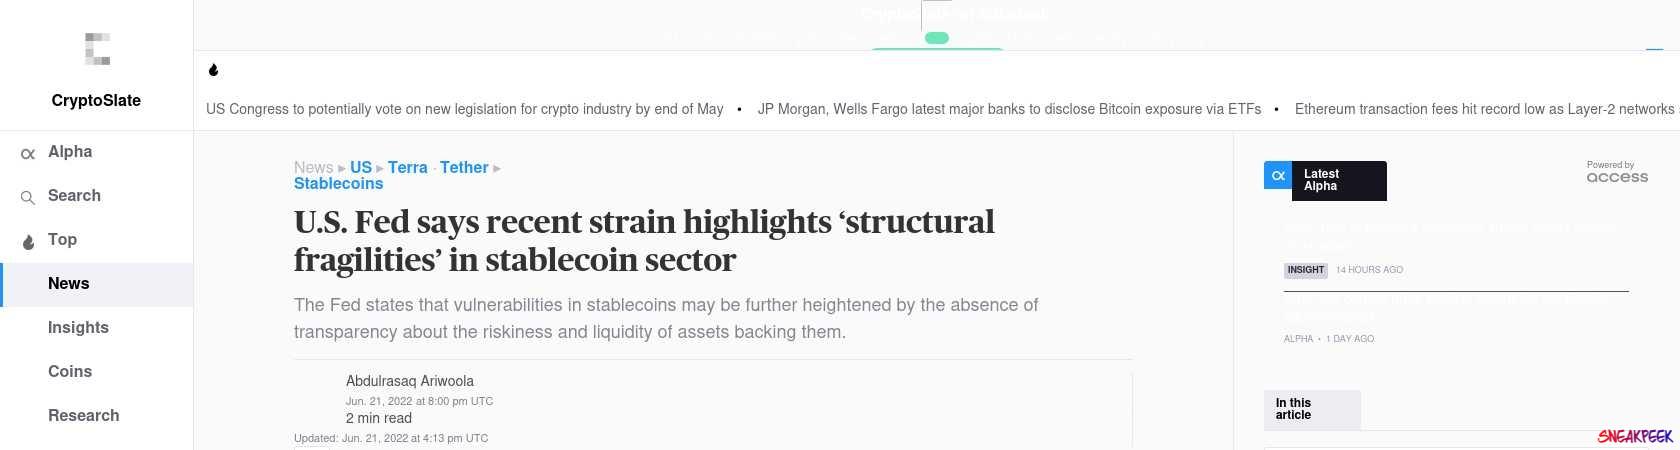 Read the full Article:  ⭲ U.S. Fed says recent strain highlights ‘structural fragilities’ in stablecoin sector